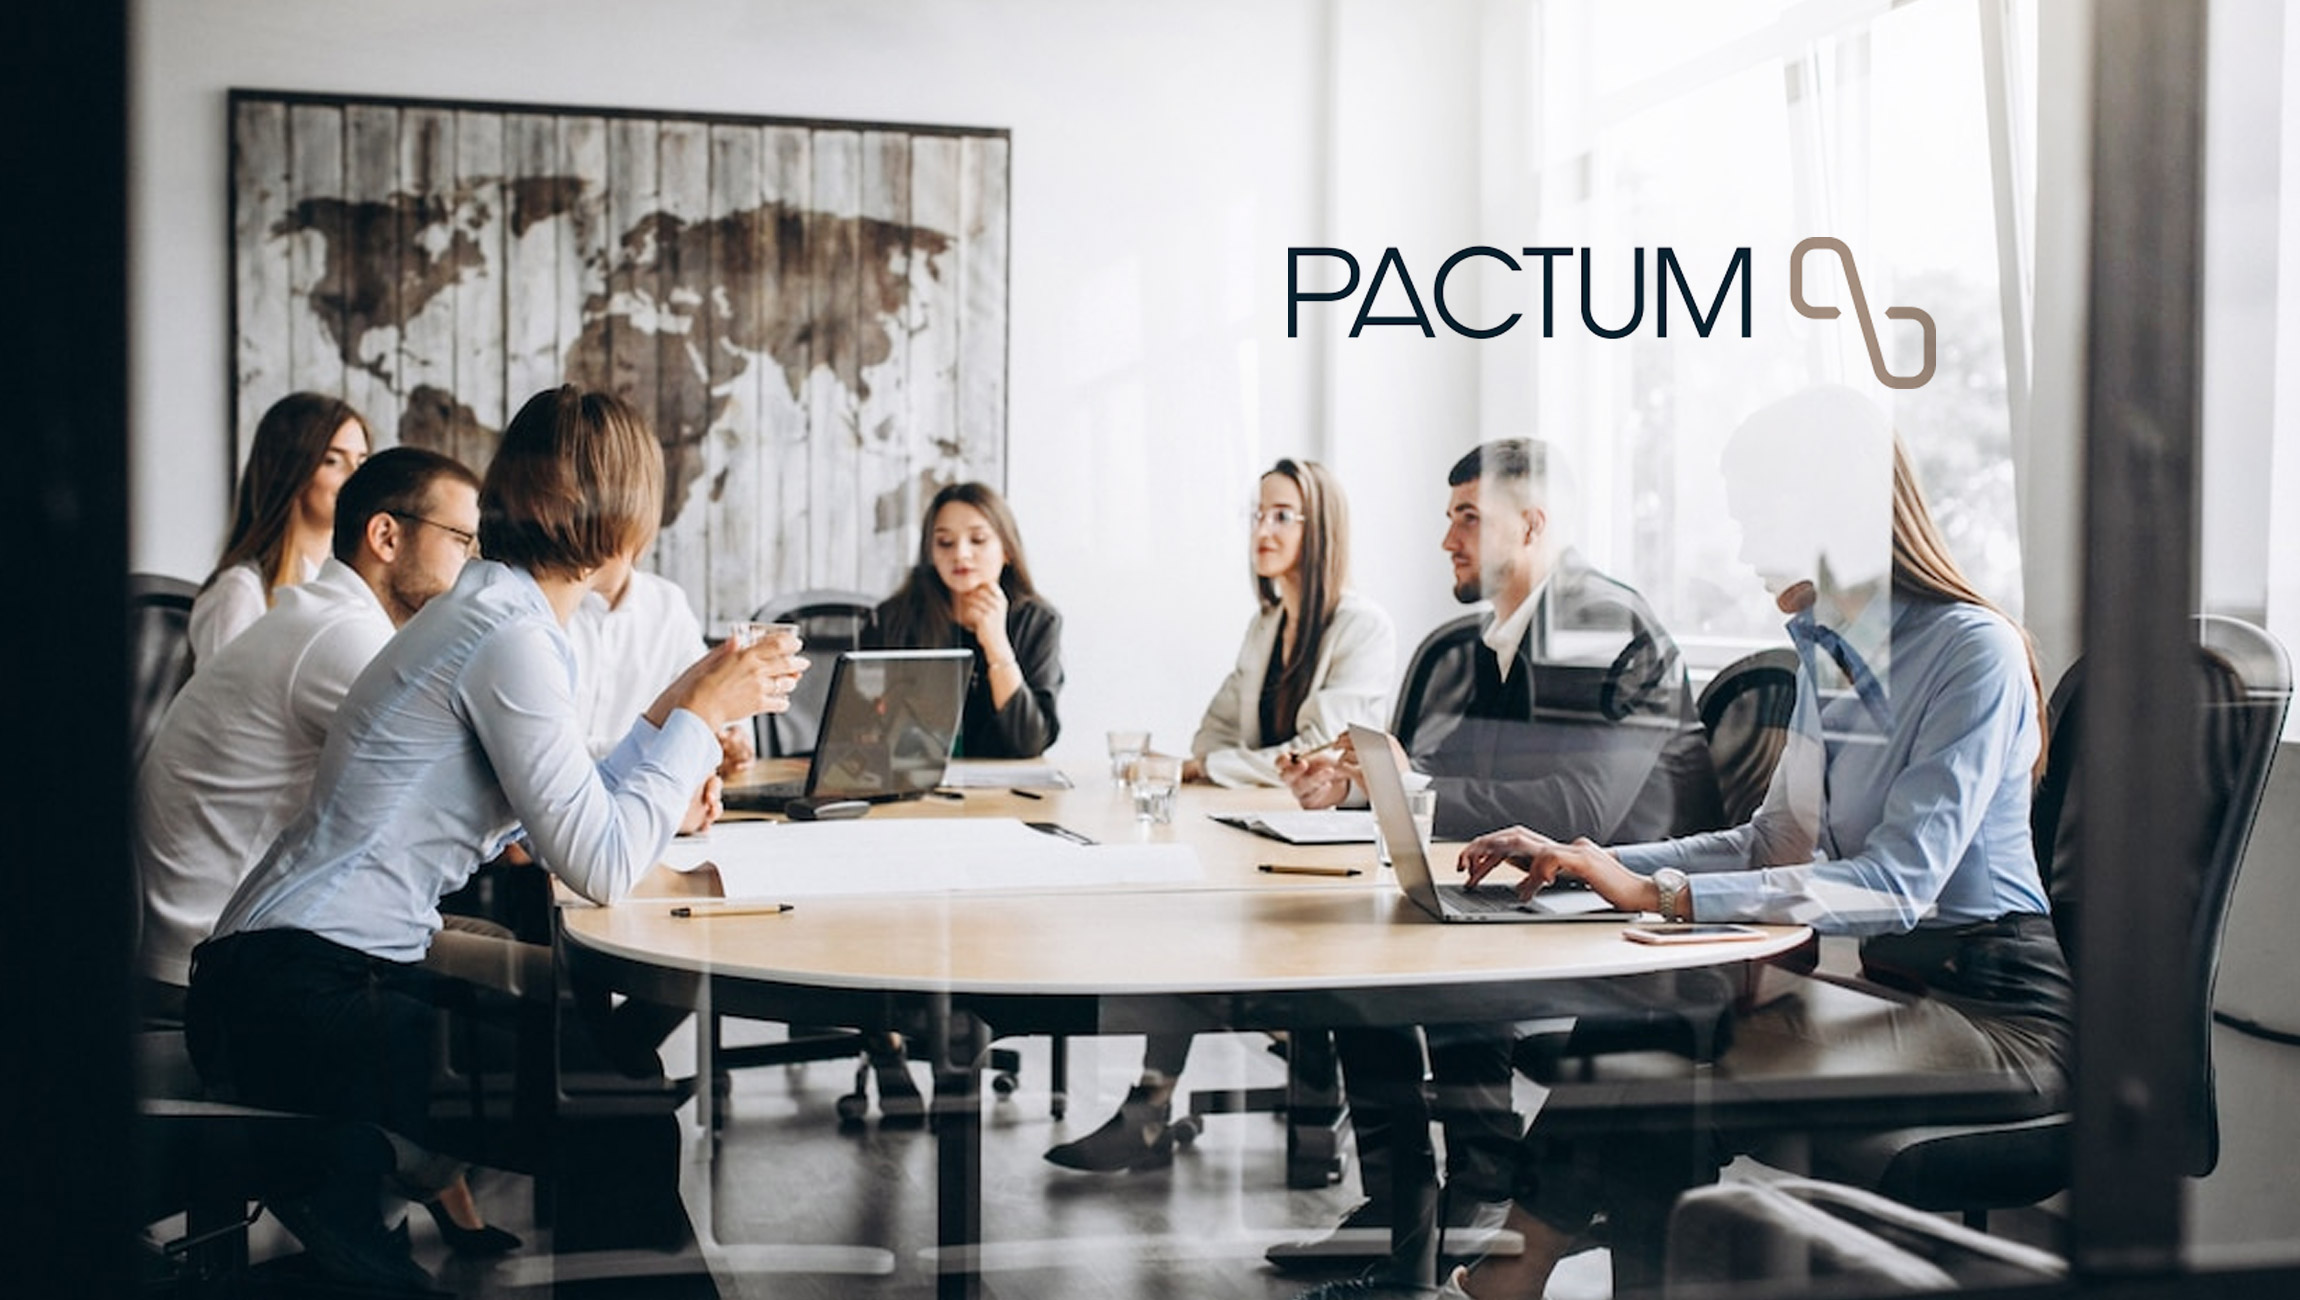 Pactum Named a Finalist in Digital Procurement World Amsterdam 2022 Startup Competition